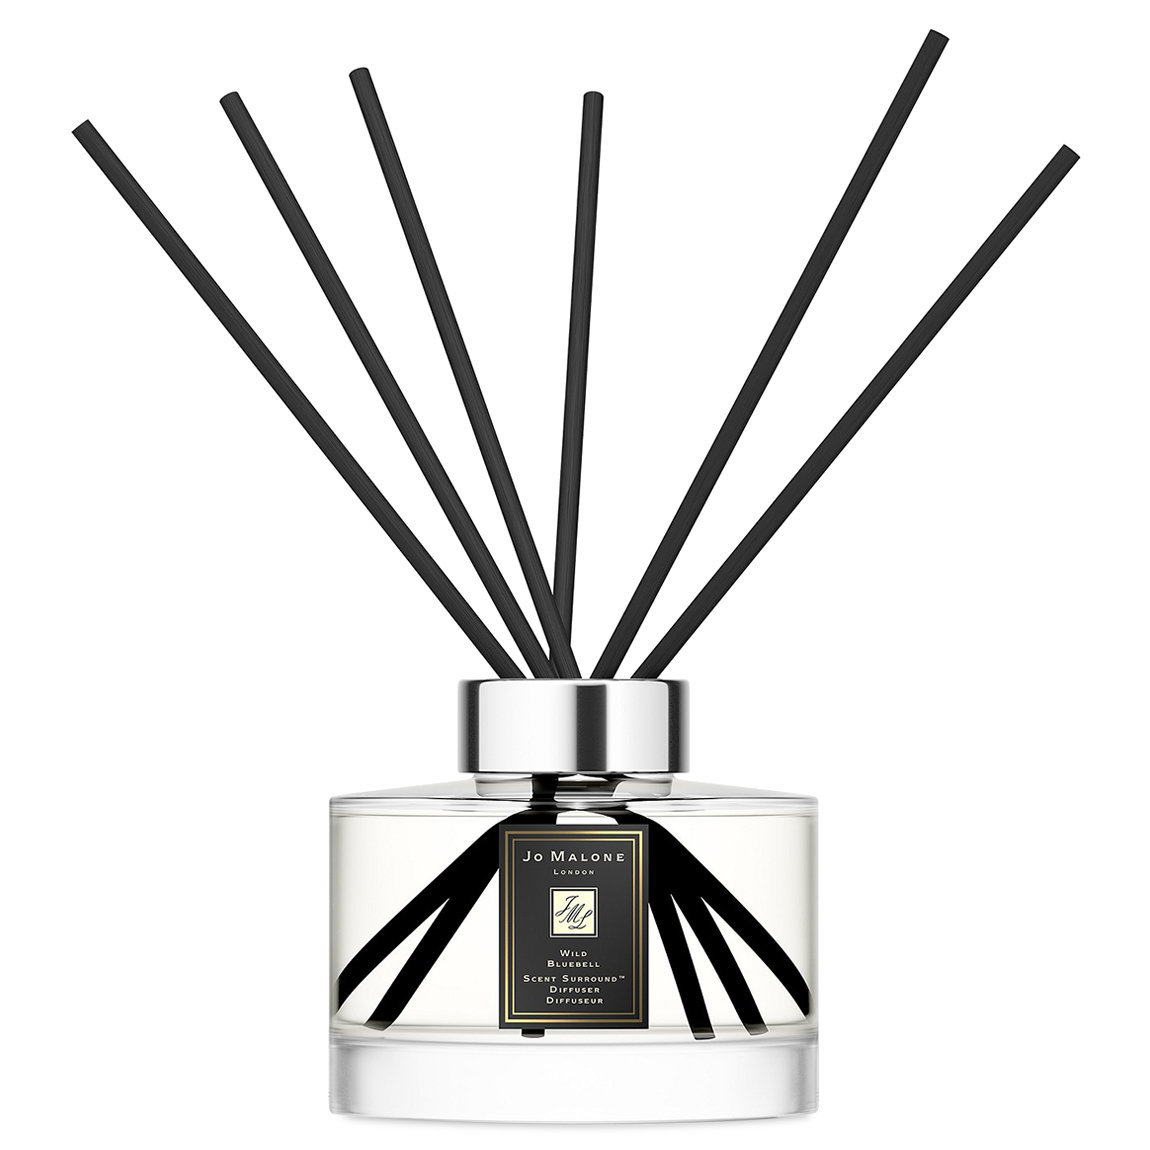 Jo Malone London Wild Bluebell Scent Surround Diffuser alternative view 1 - product swatch.